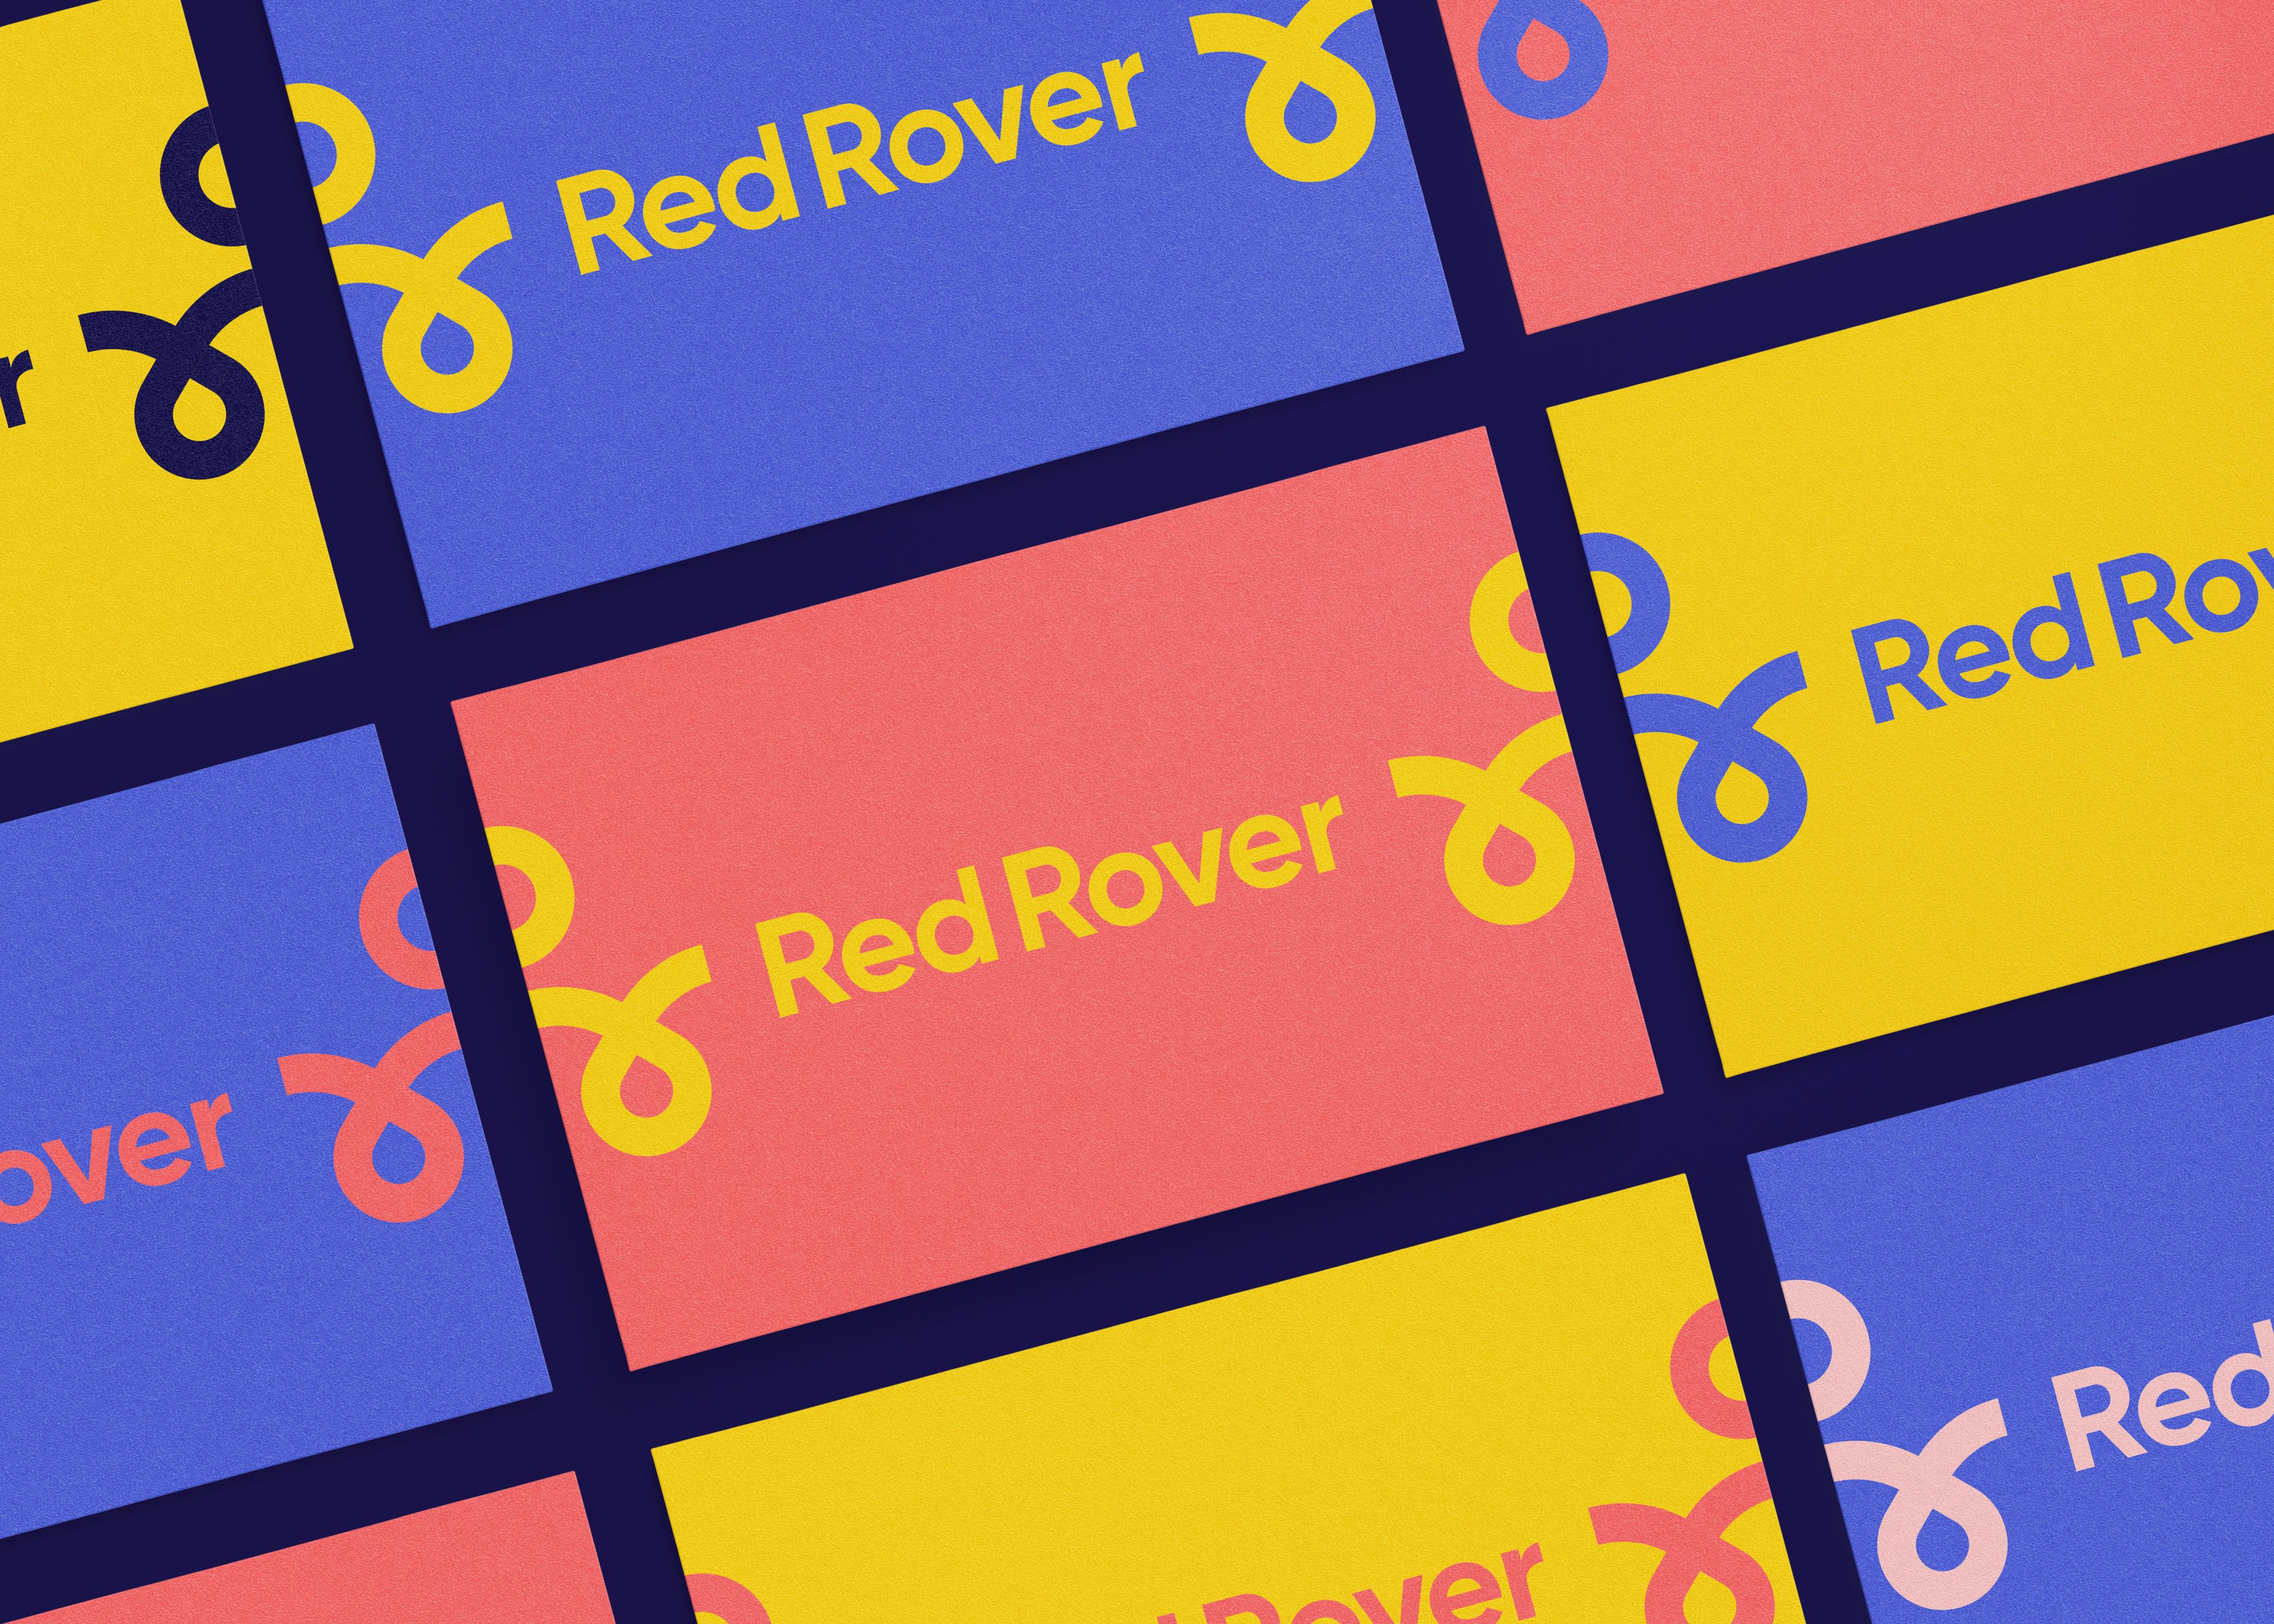 featured image two:Red Rover Brand Identity